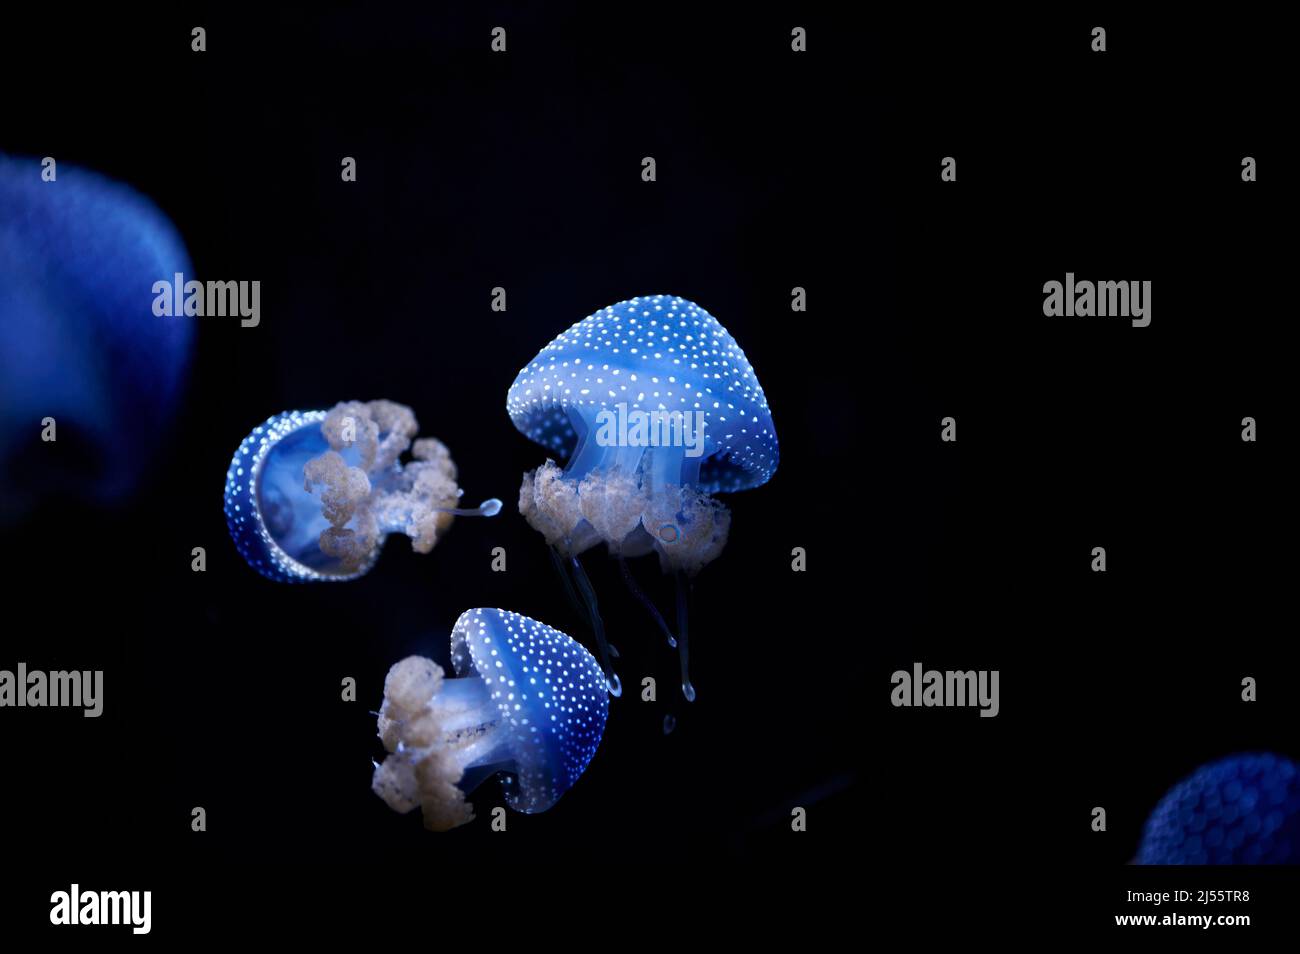 Australian Spotted Jellyfish, Phyllorhiza punctata, illuminated in blue swimming in the water on a black background Stock Photo